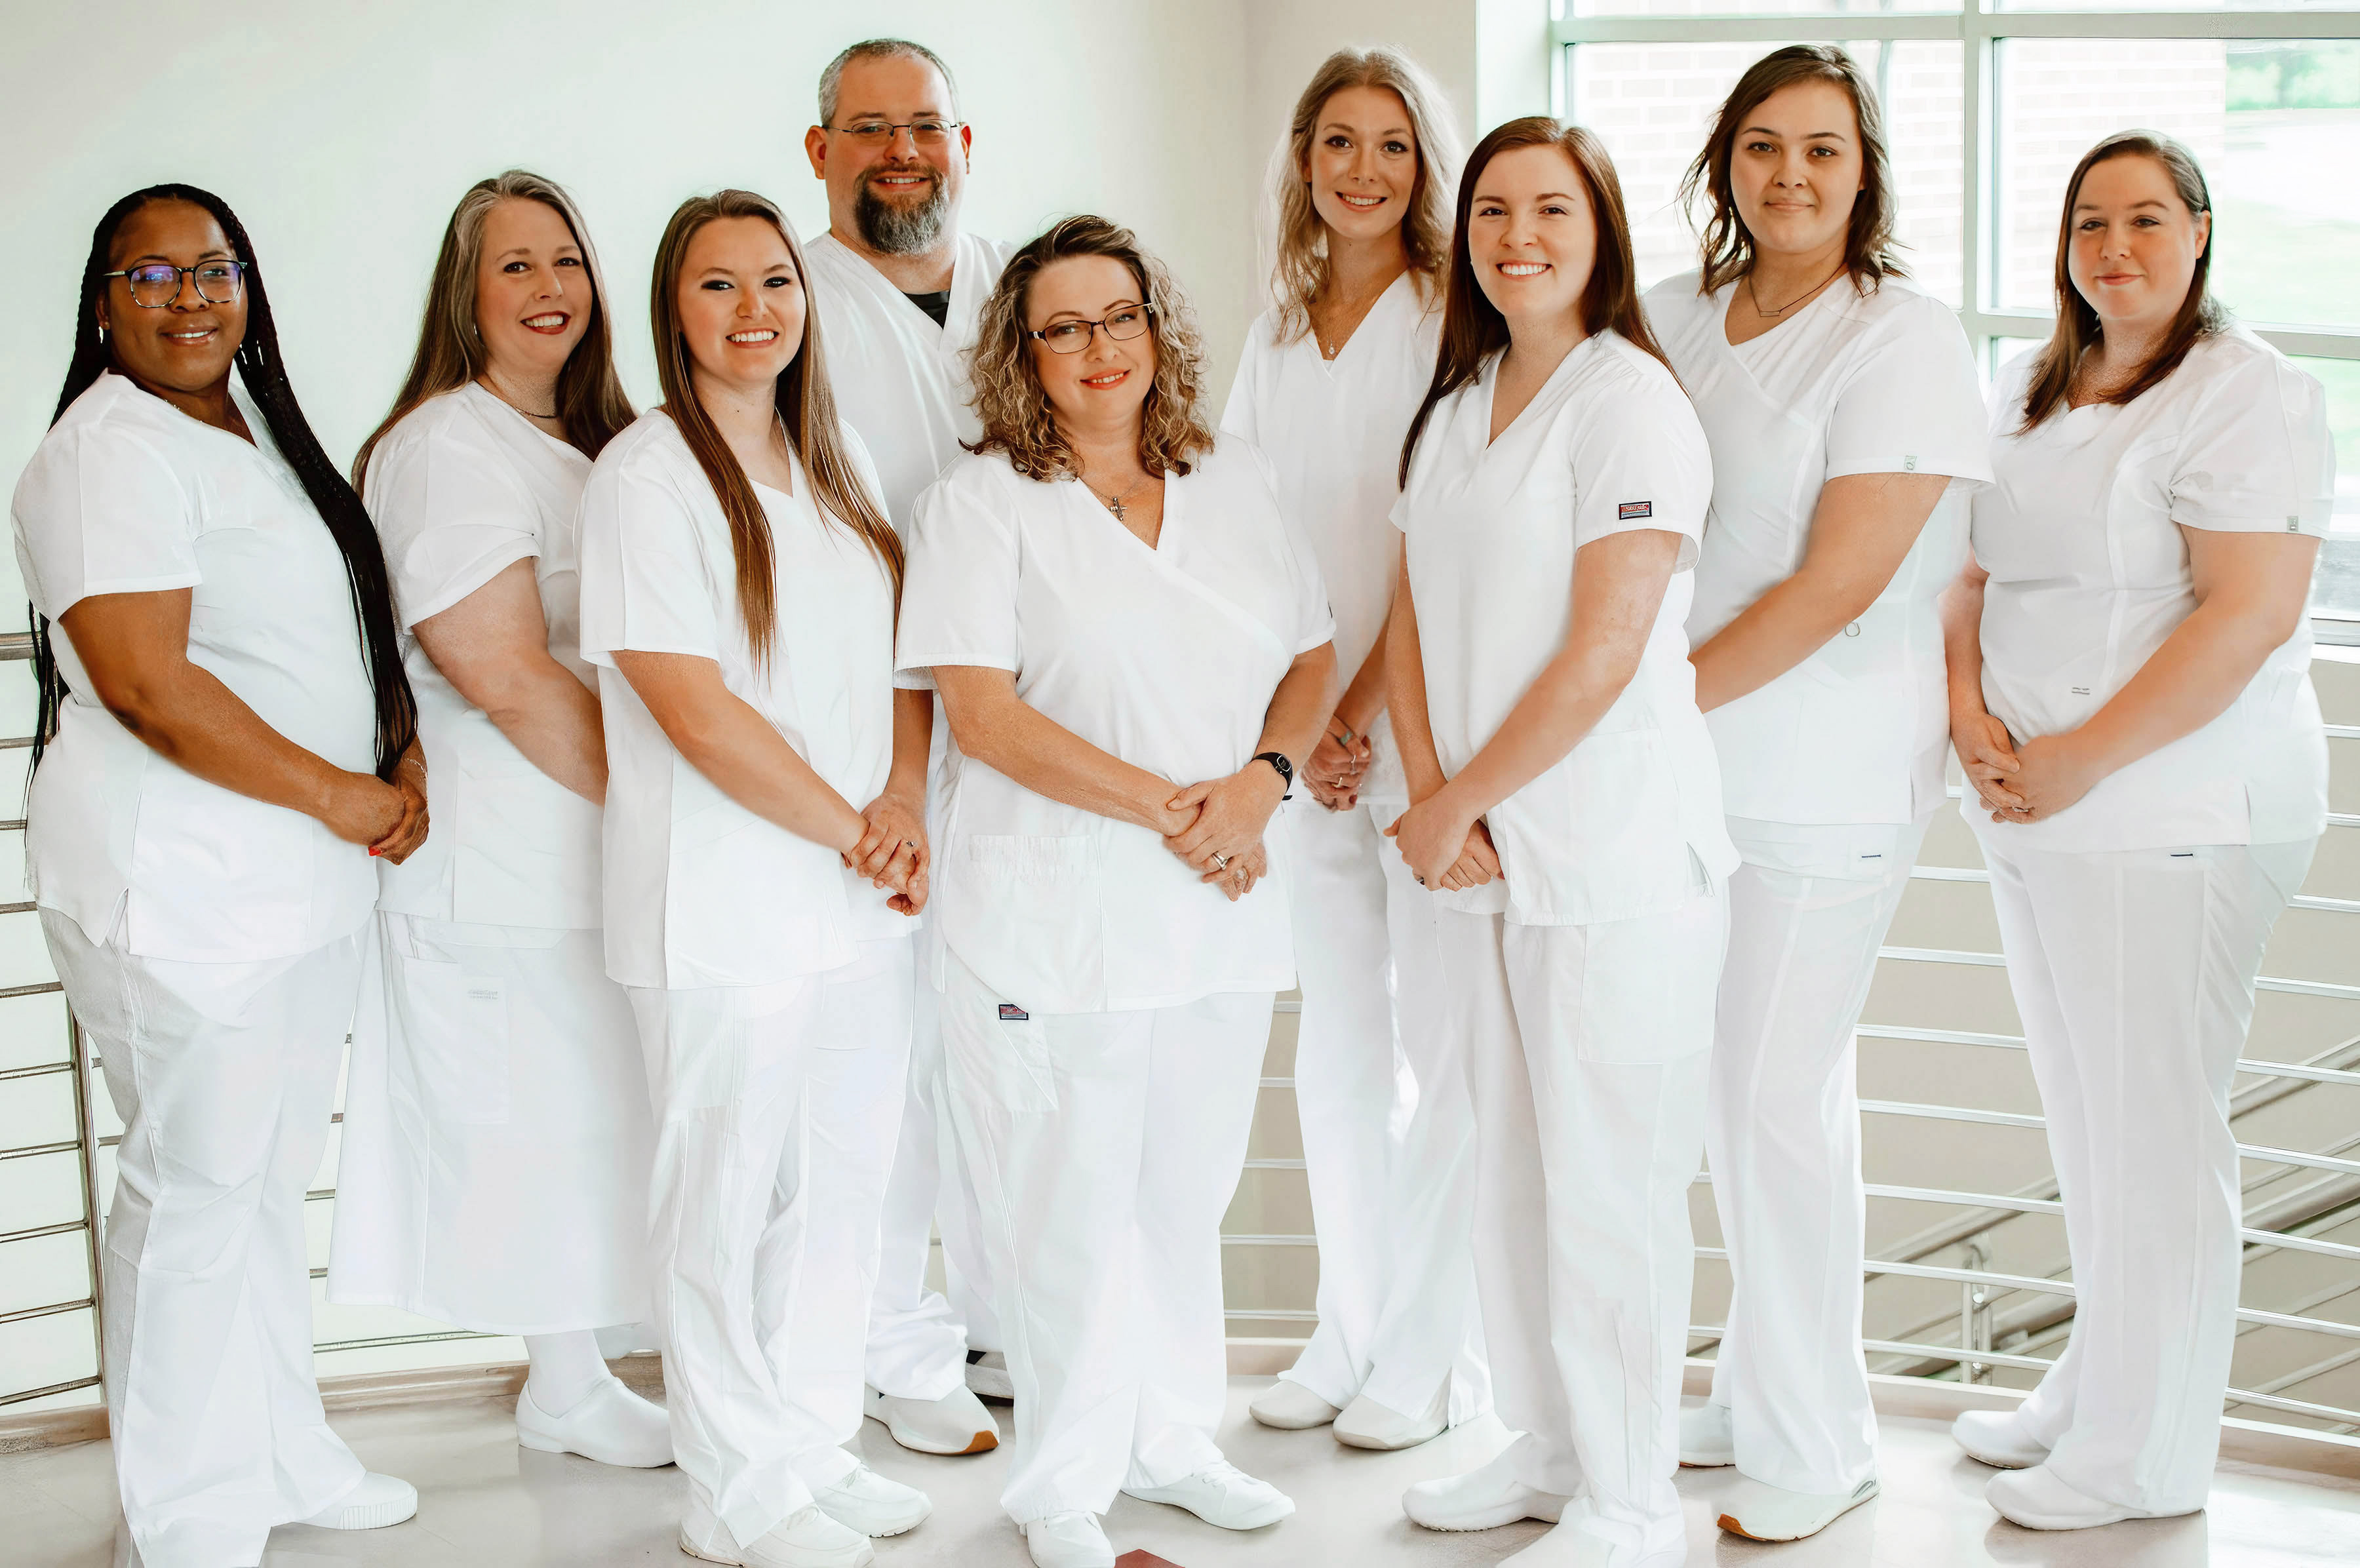 GNTC Associate of Science in Nursing graduates (from left) Relicia Garrett, Tria Staley, Jordan Hughes, Jason Harrod, Andrea Ice, Lauryn Baxter, Haley Wilson, Courtney Velasquez and Mary Morter passed the NCLEX-RN exam on their first attempt. They graduated on May 4, 2023.